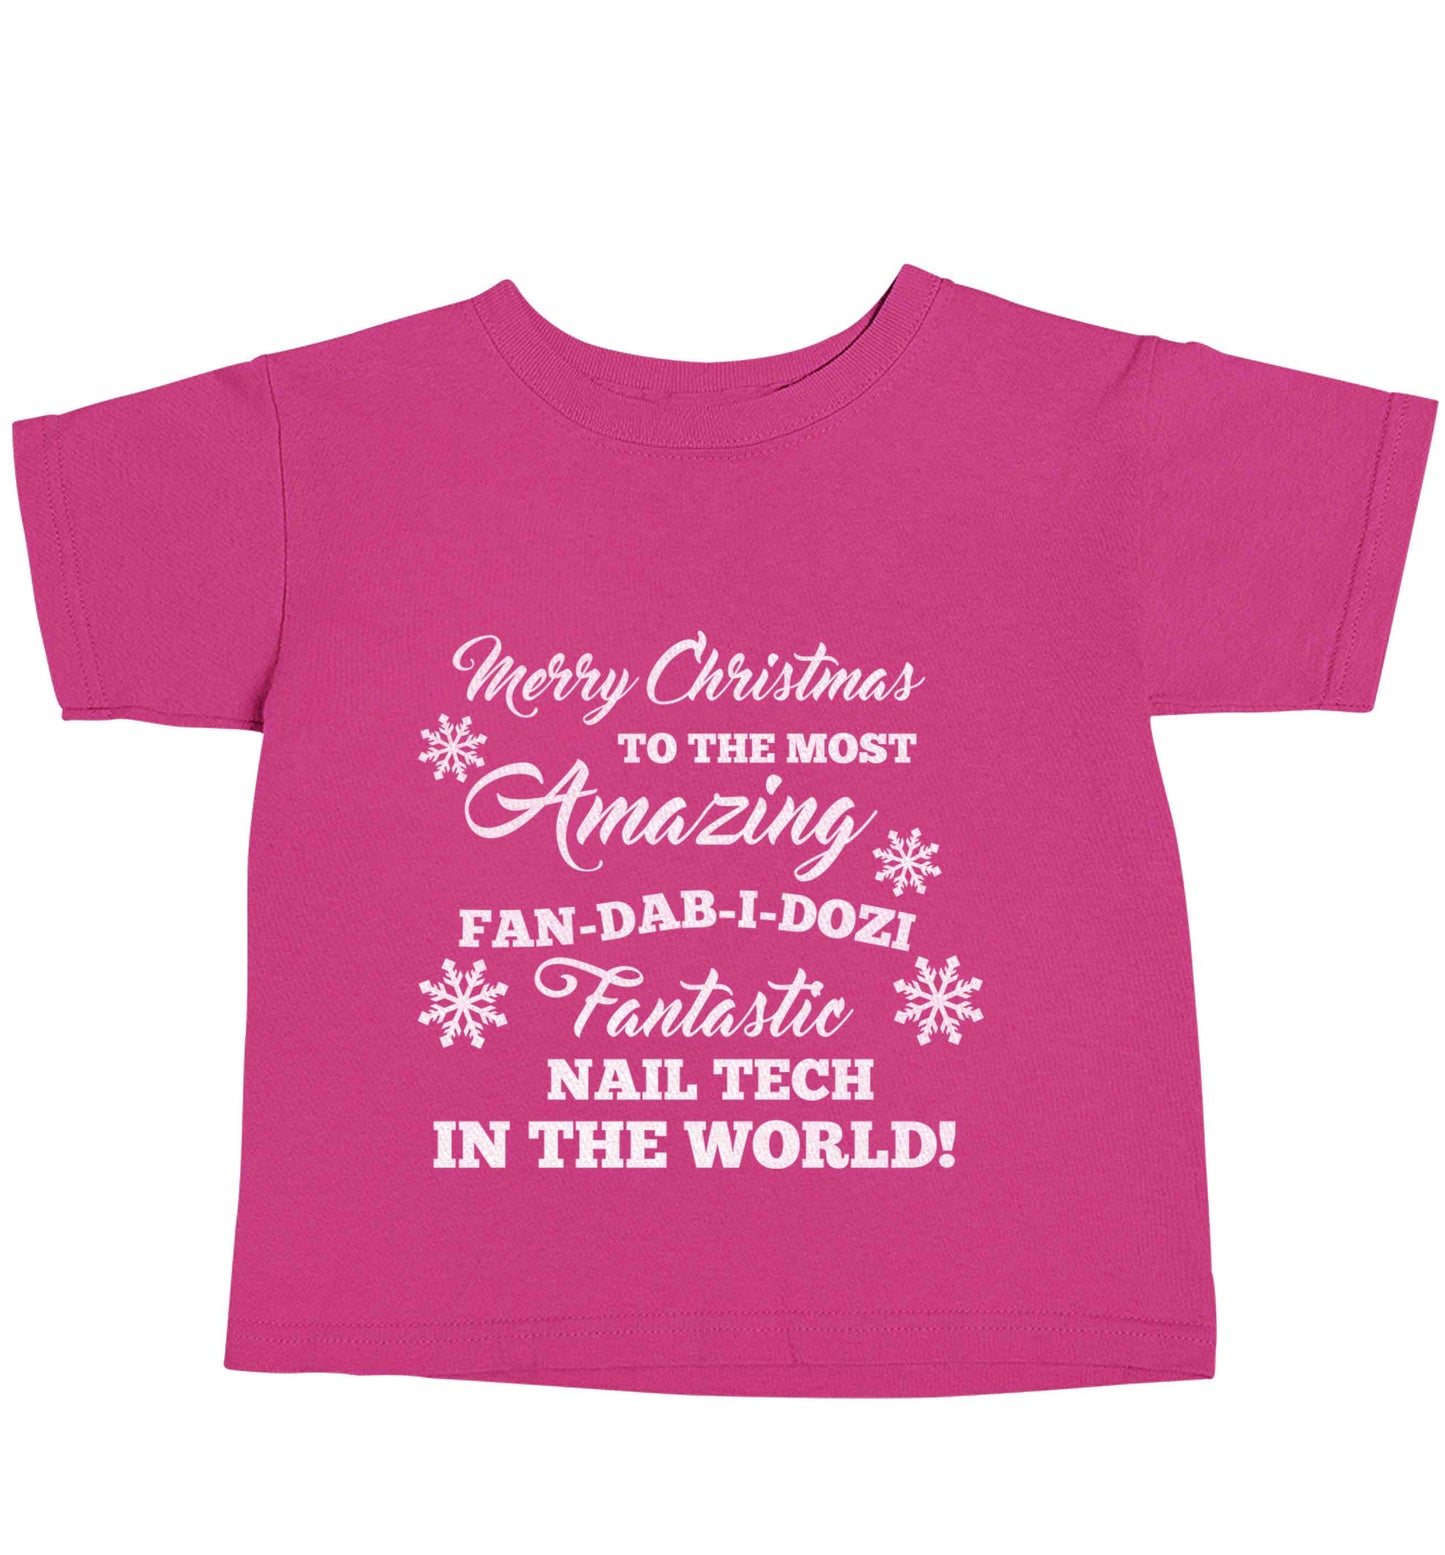 Merry Christmas to the most amazing fan-dab-i-dozi fantasic nail technician in the world pink baby toddler Tshirt 2 Years